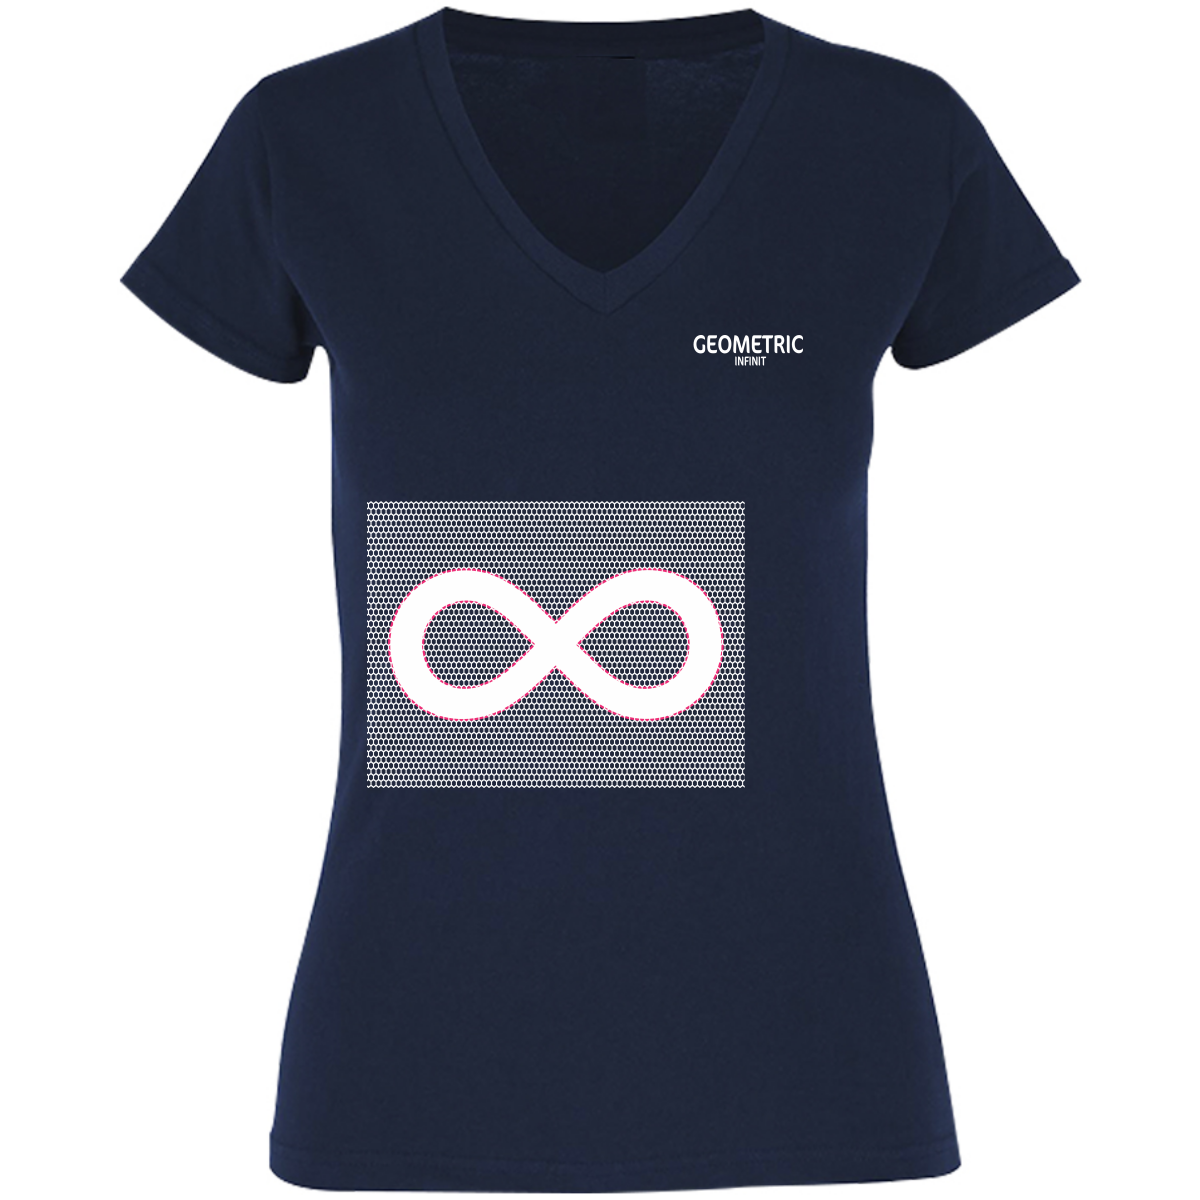 linea-geometric-infinit-color-claro-cuello-v-mujer-d0306gpeis.png